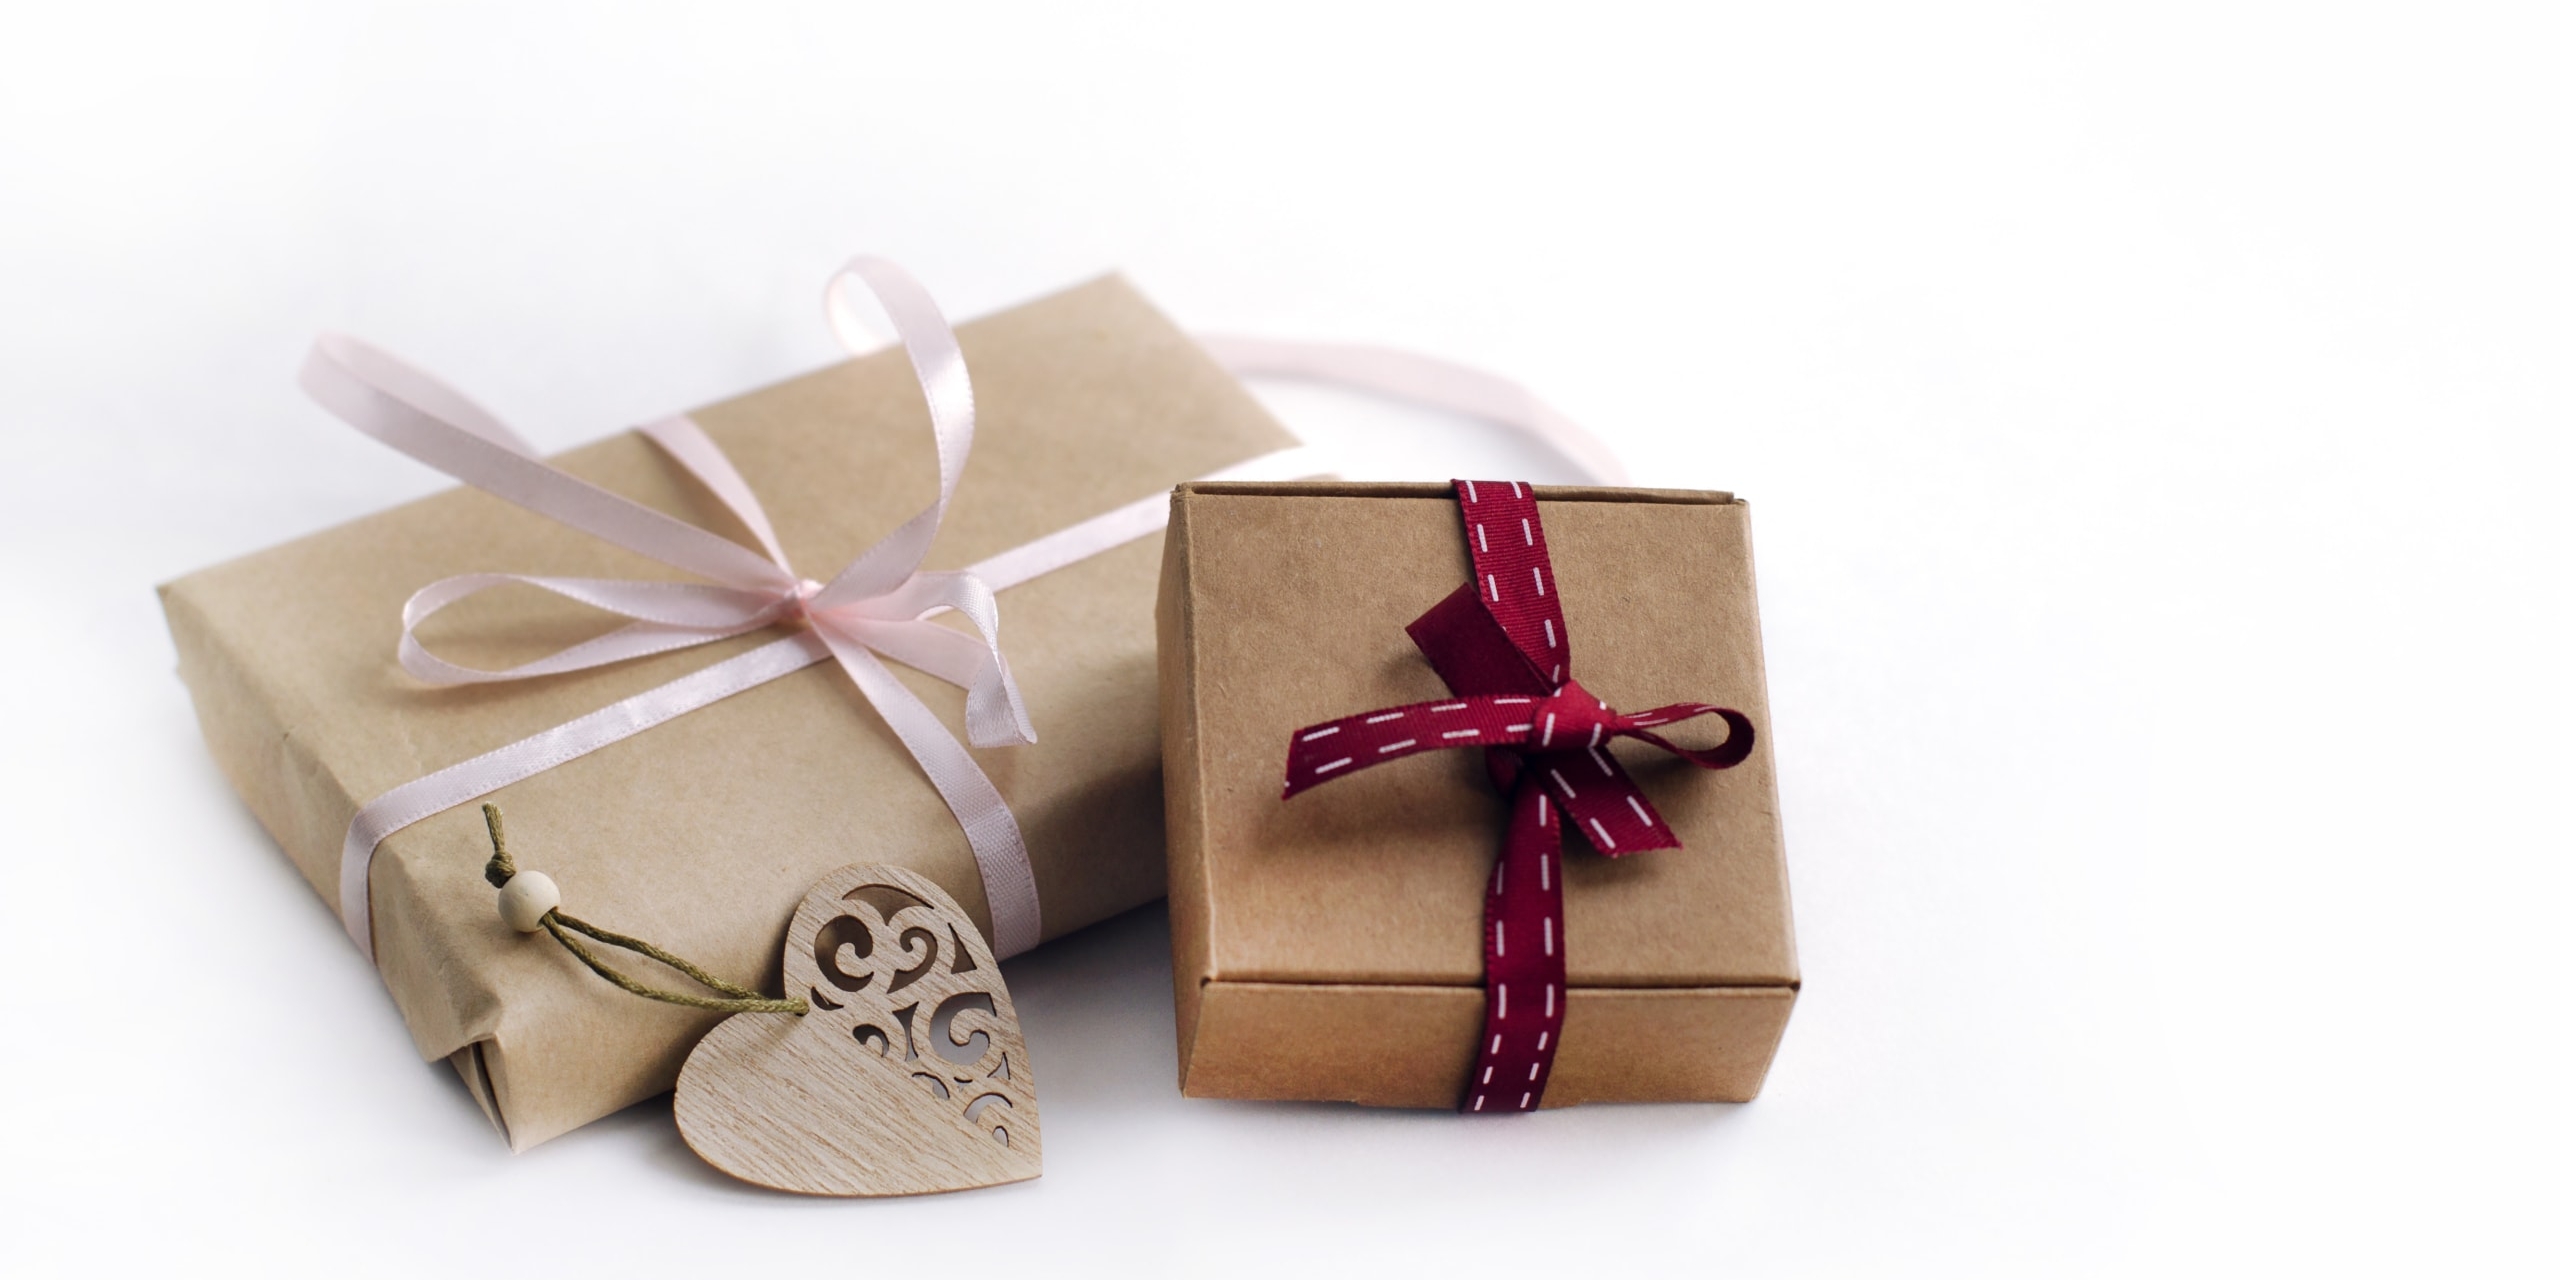 Two,Gift,Boxes,Tied,With,Ribbons,,Wooden,Carved,Heart,On